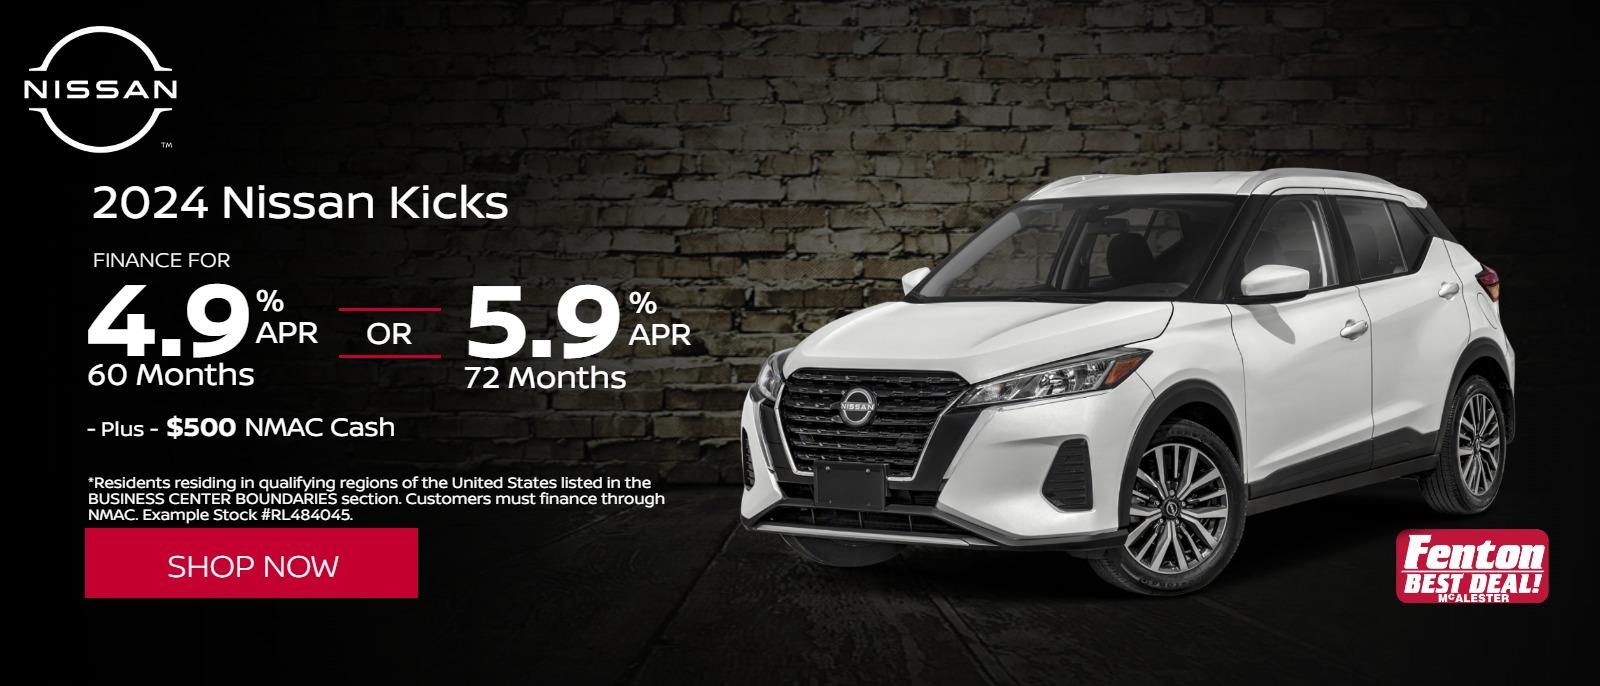 4.9% | or | 5.9% APR Financing available on 2024 Nissan Kicks
*Residents residing in qualifying regions of the United States listed in the BUSINESS CENTER BOUNDARIES section. Customers must finance through NMAC